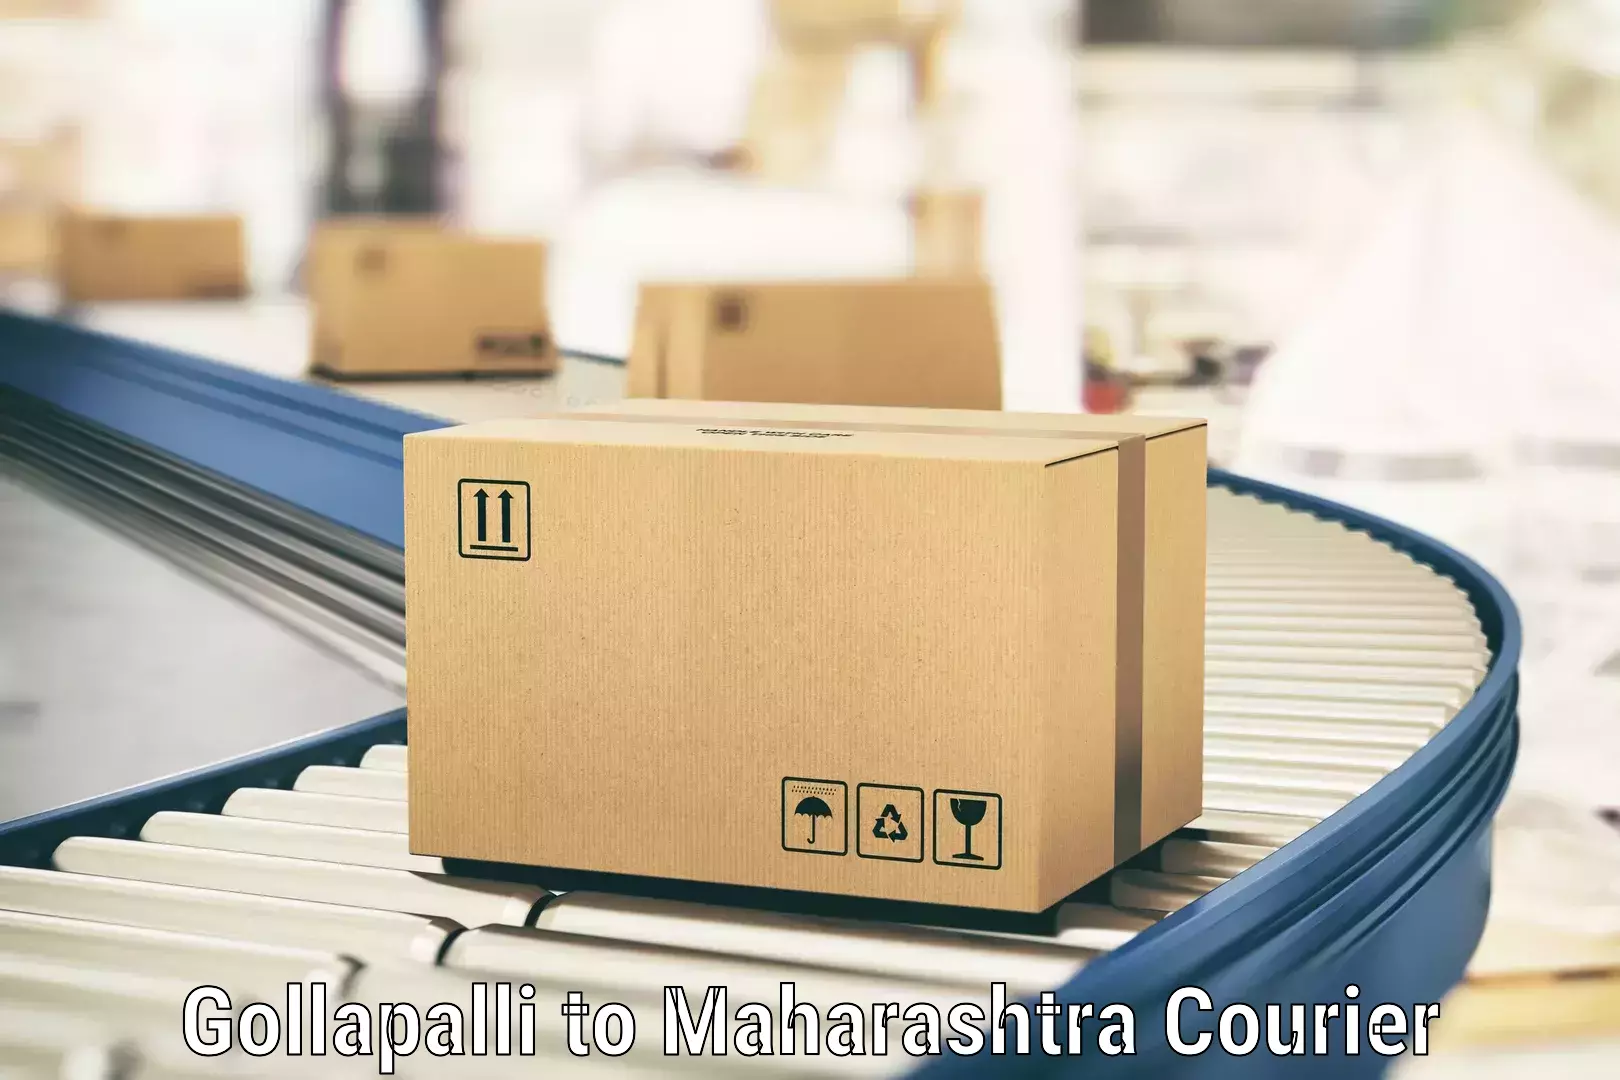 Expedited shipping solutions Gollapalli to Thane